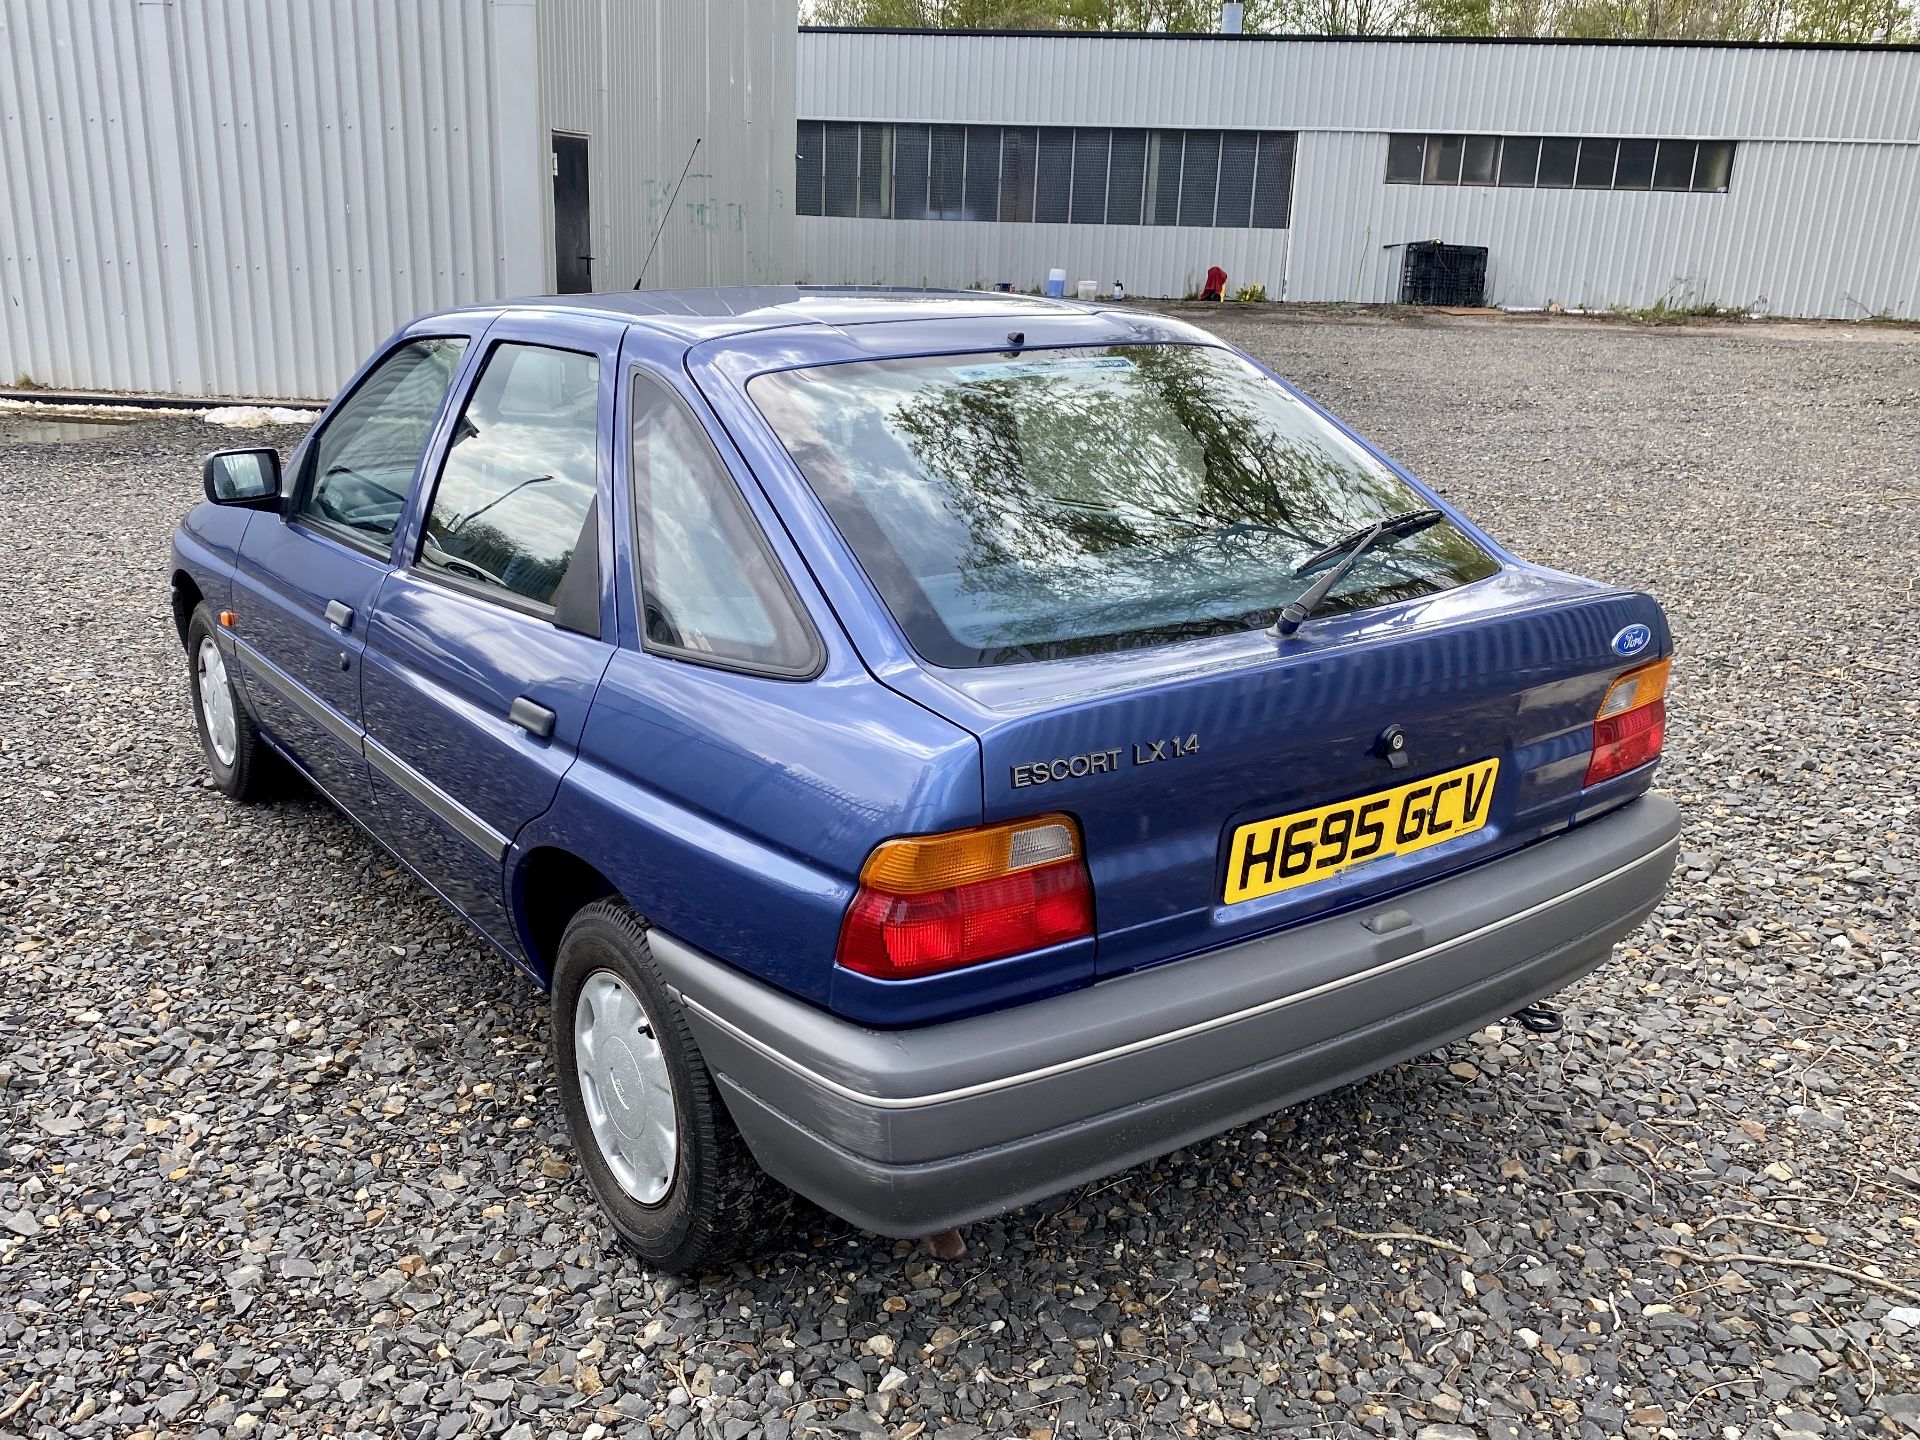 Ford Escort LX  - Image 13 of 54